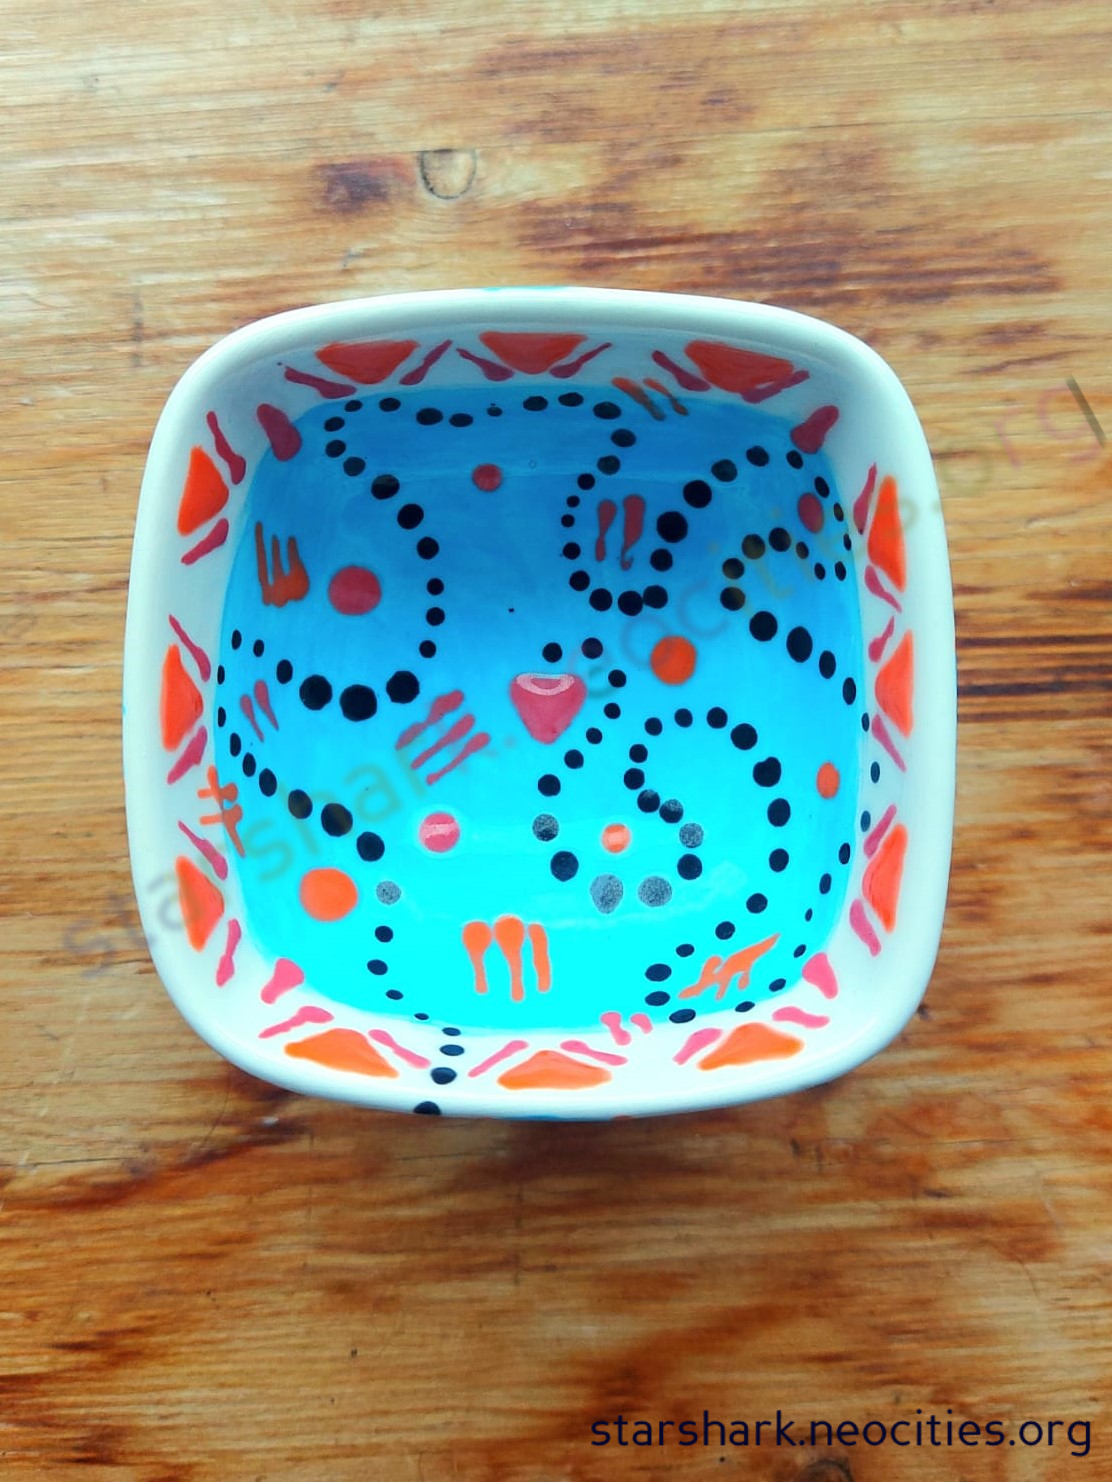 a second small ceramic trinket bowl with blue, orange, red and black designs.